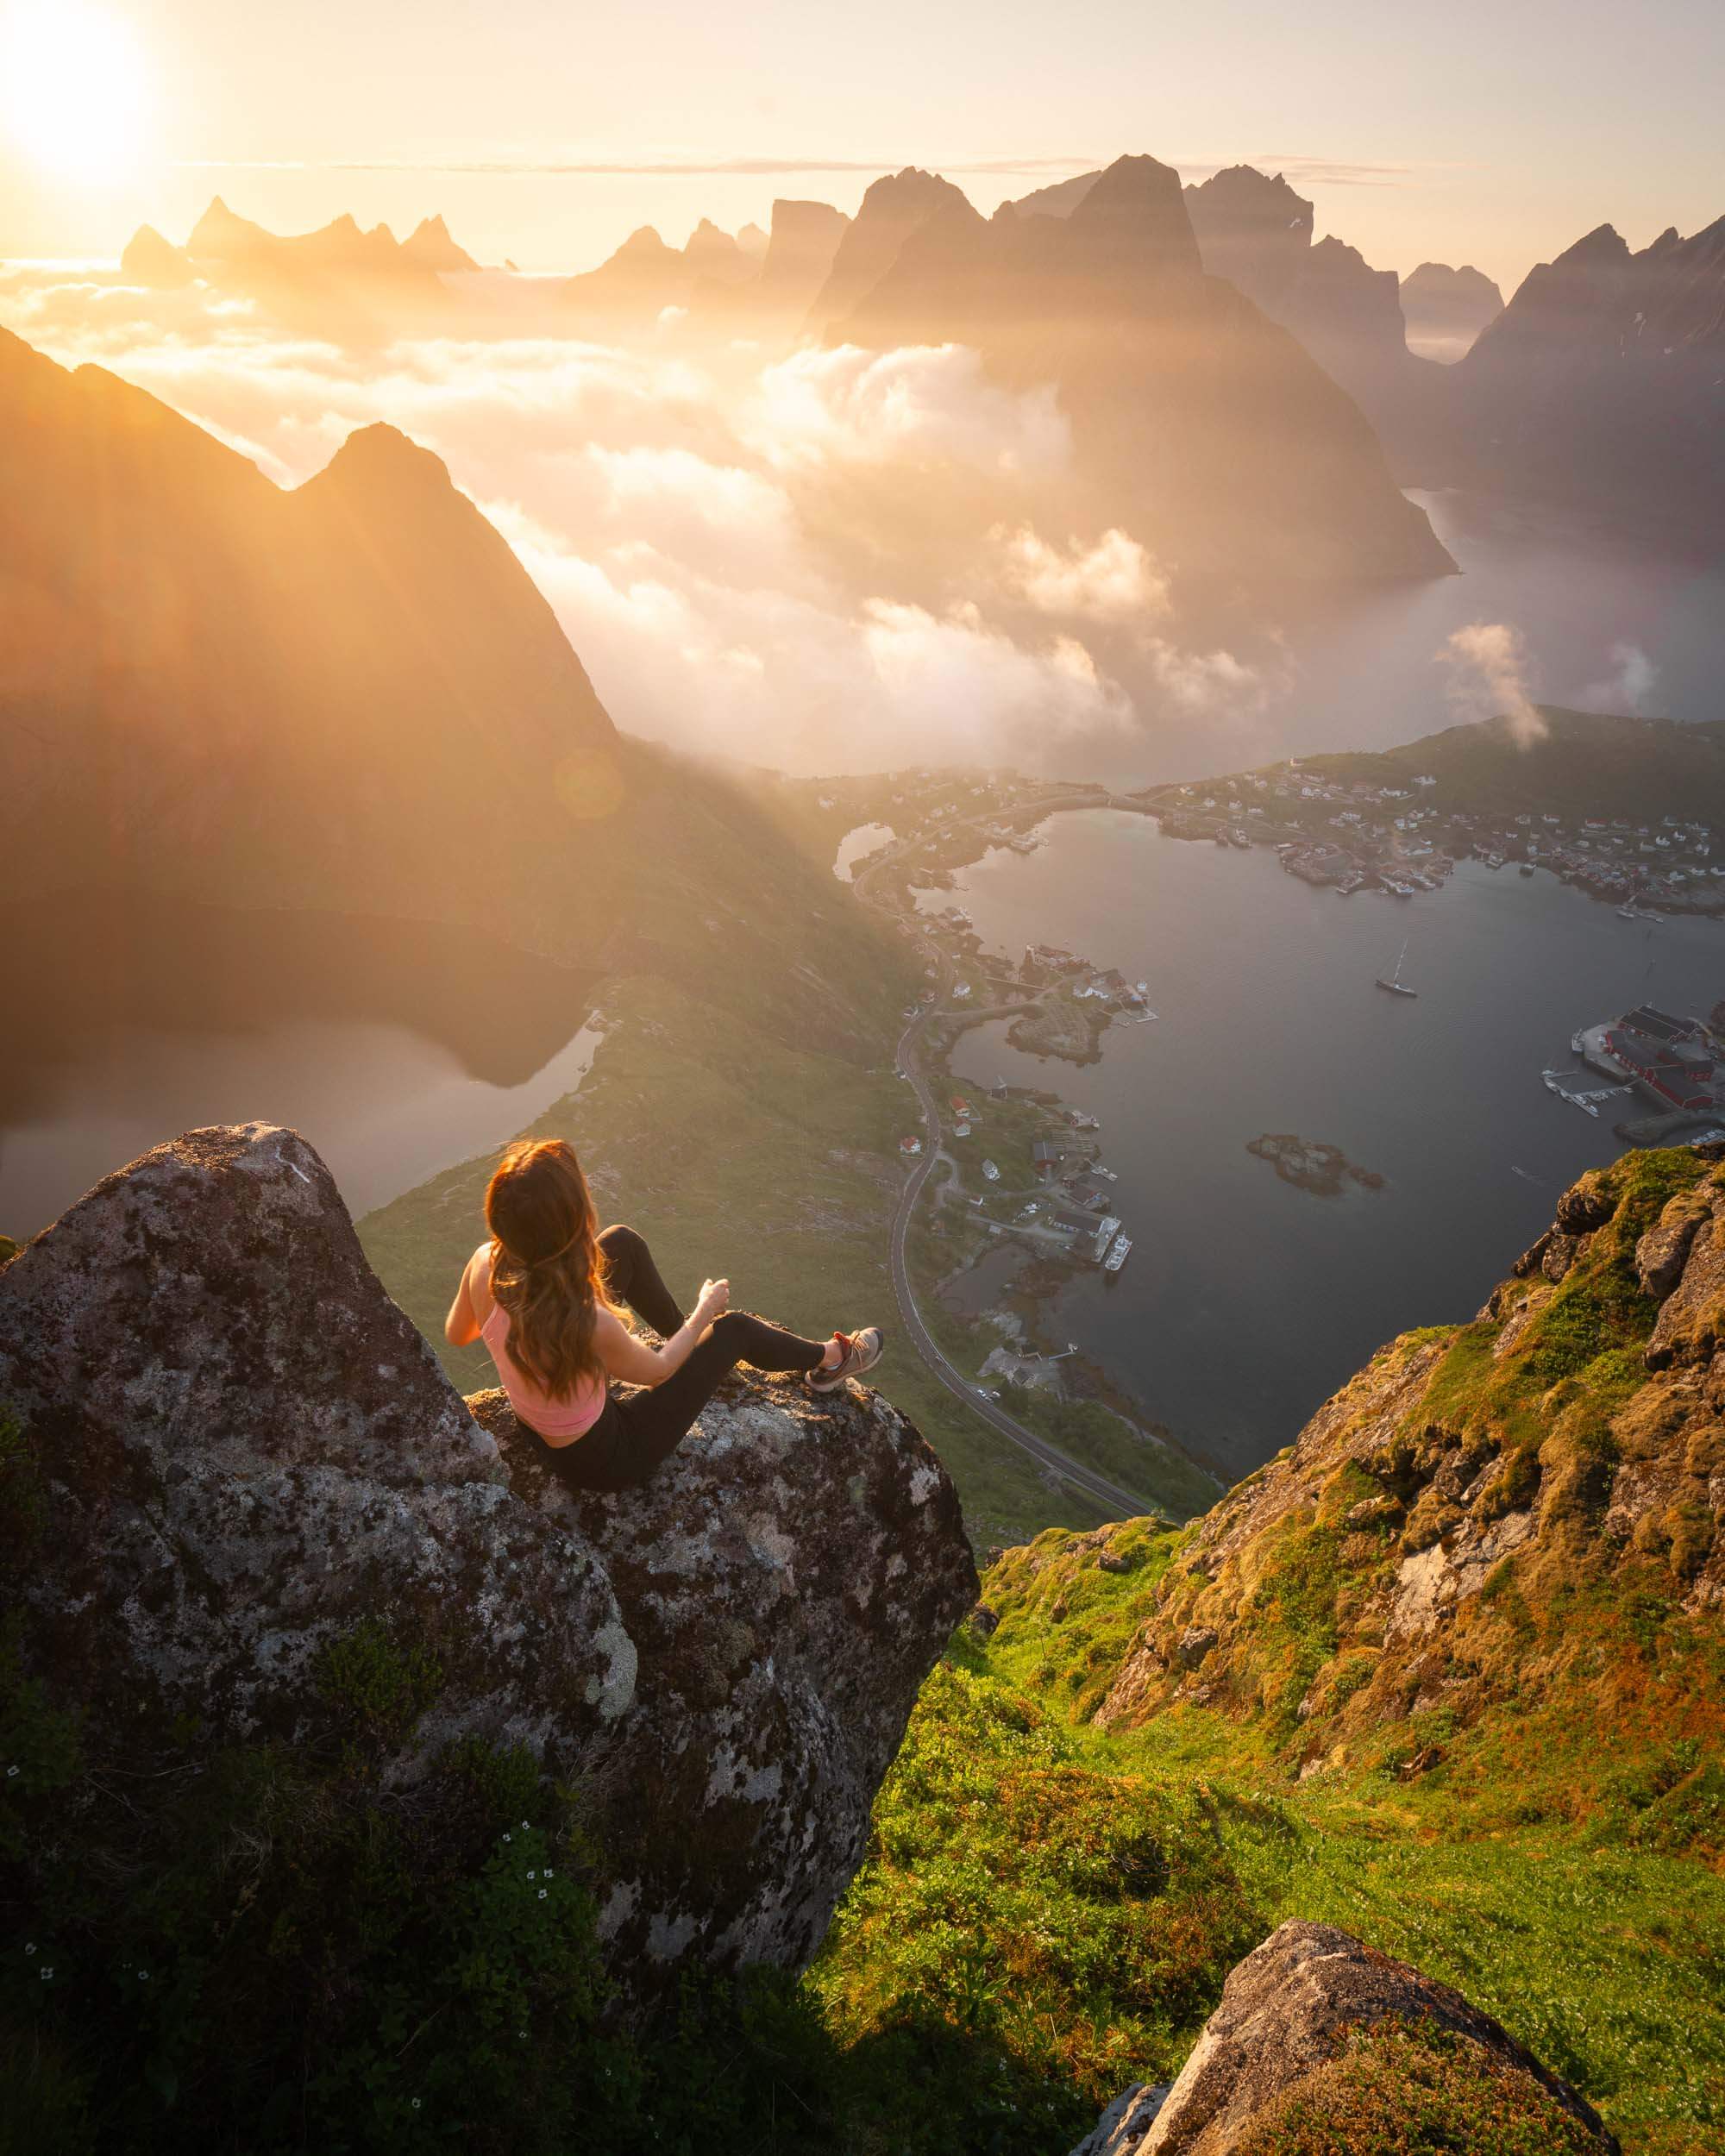 jess wandering watching sunset from the reinebringen hike, one of the best day hikes in the lofoten islands norway